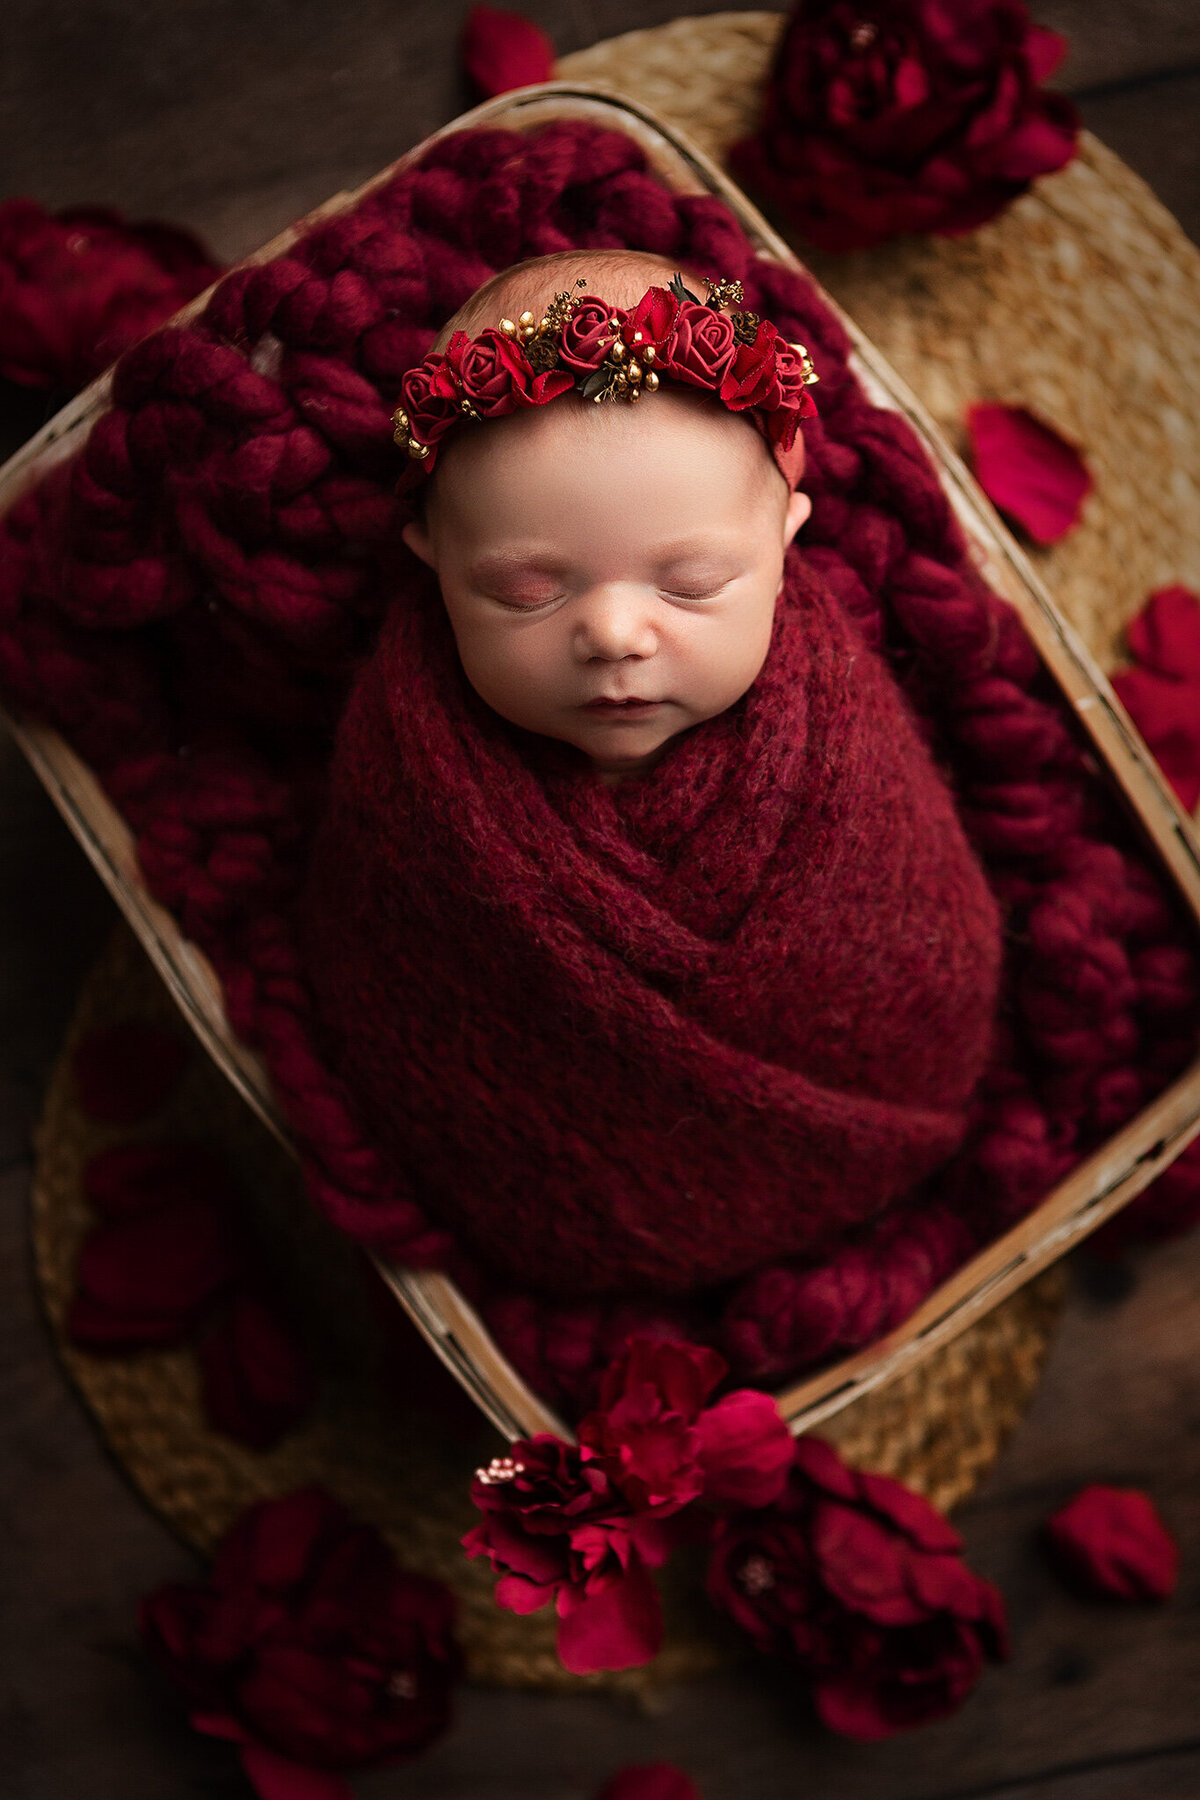 dayton-ohio-newborn-baby-photographer-baby-girl-swaddled-in-knit-burgundy-wrap-in-crate-surrounded-with-red-rose-petals-amanda-estep-photography